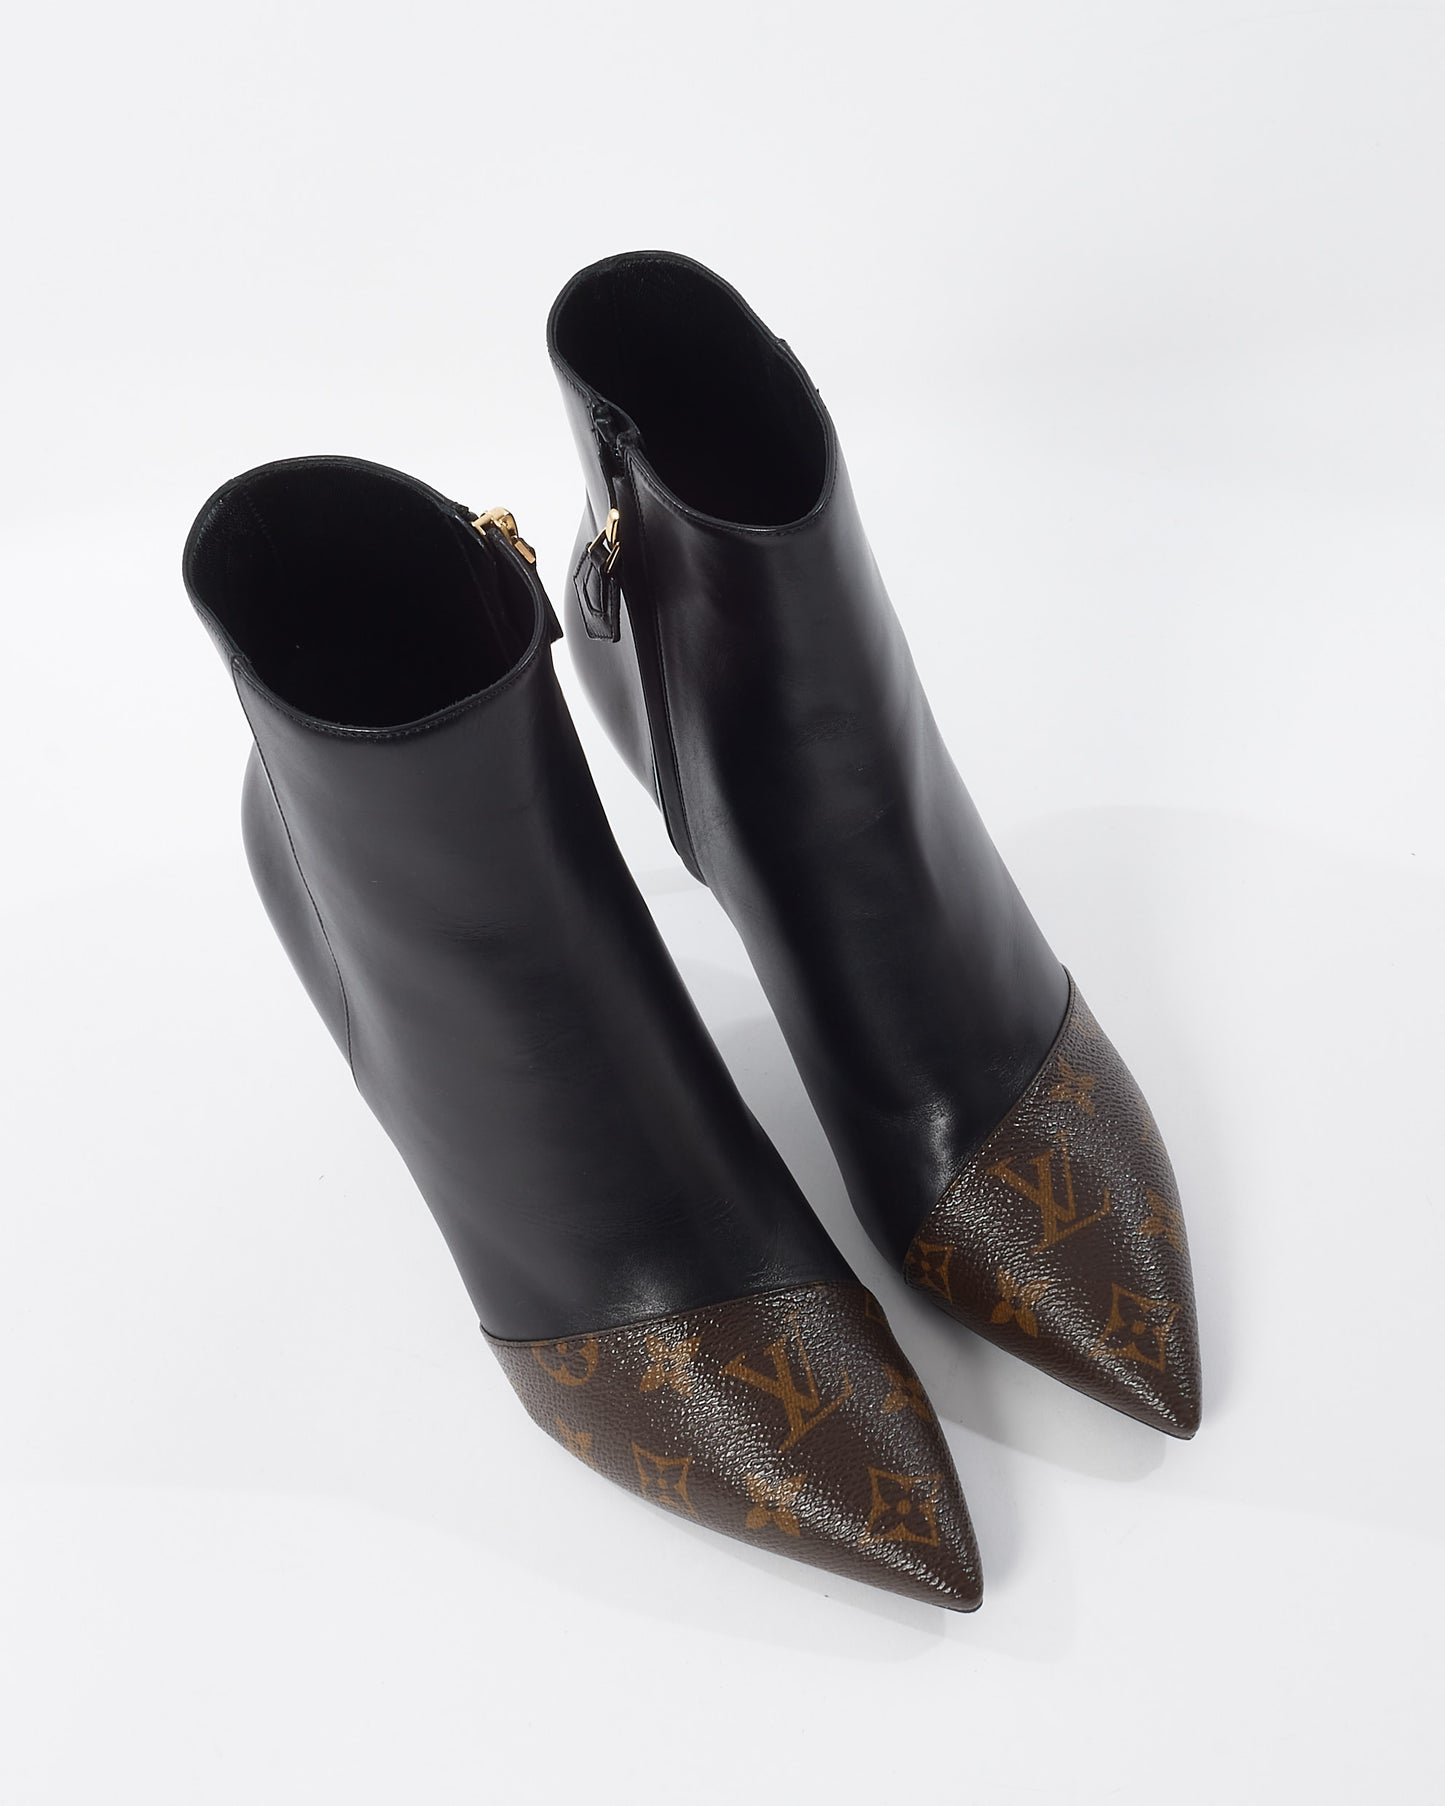 Louis Vuitton Black Leather with Monogram Cherie Ankle Boots - 41